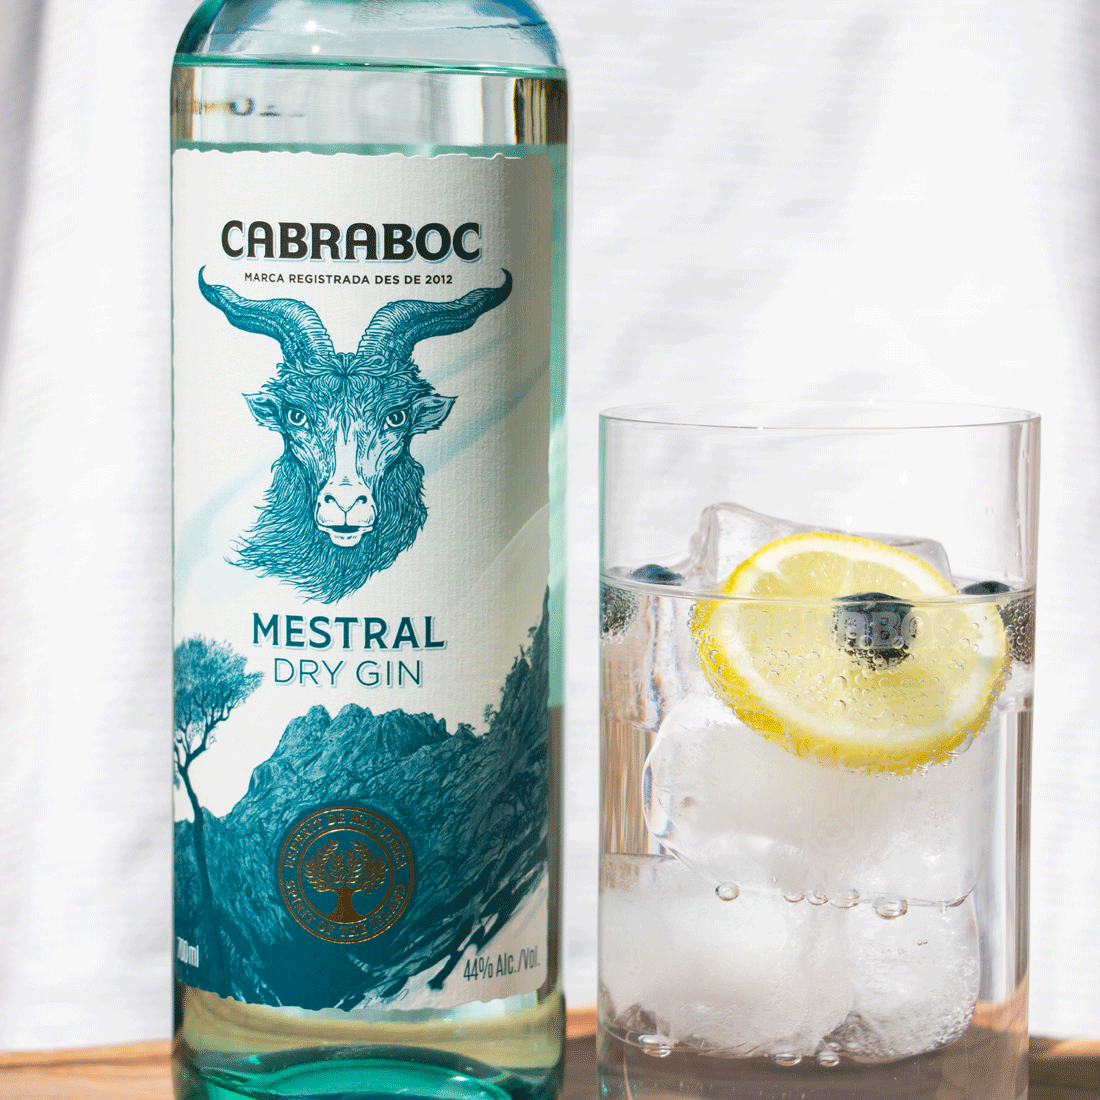 Try the gin and tonic Cabraboc Mestral